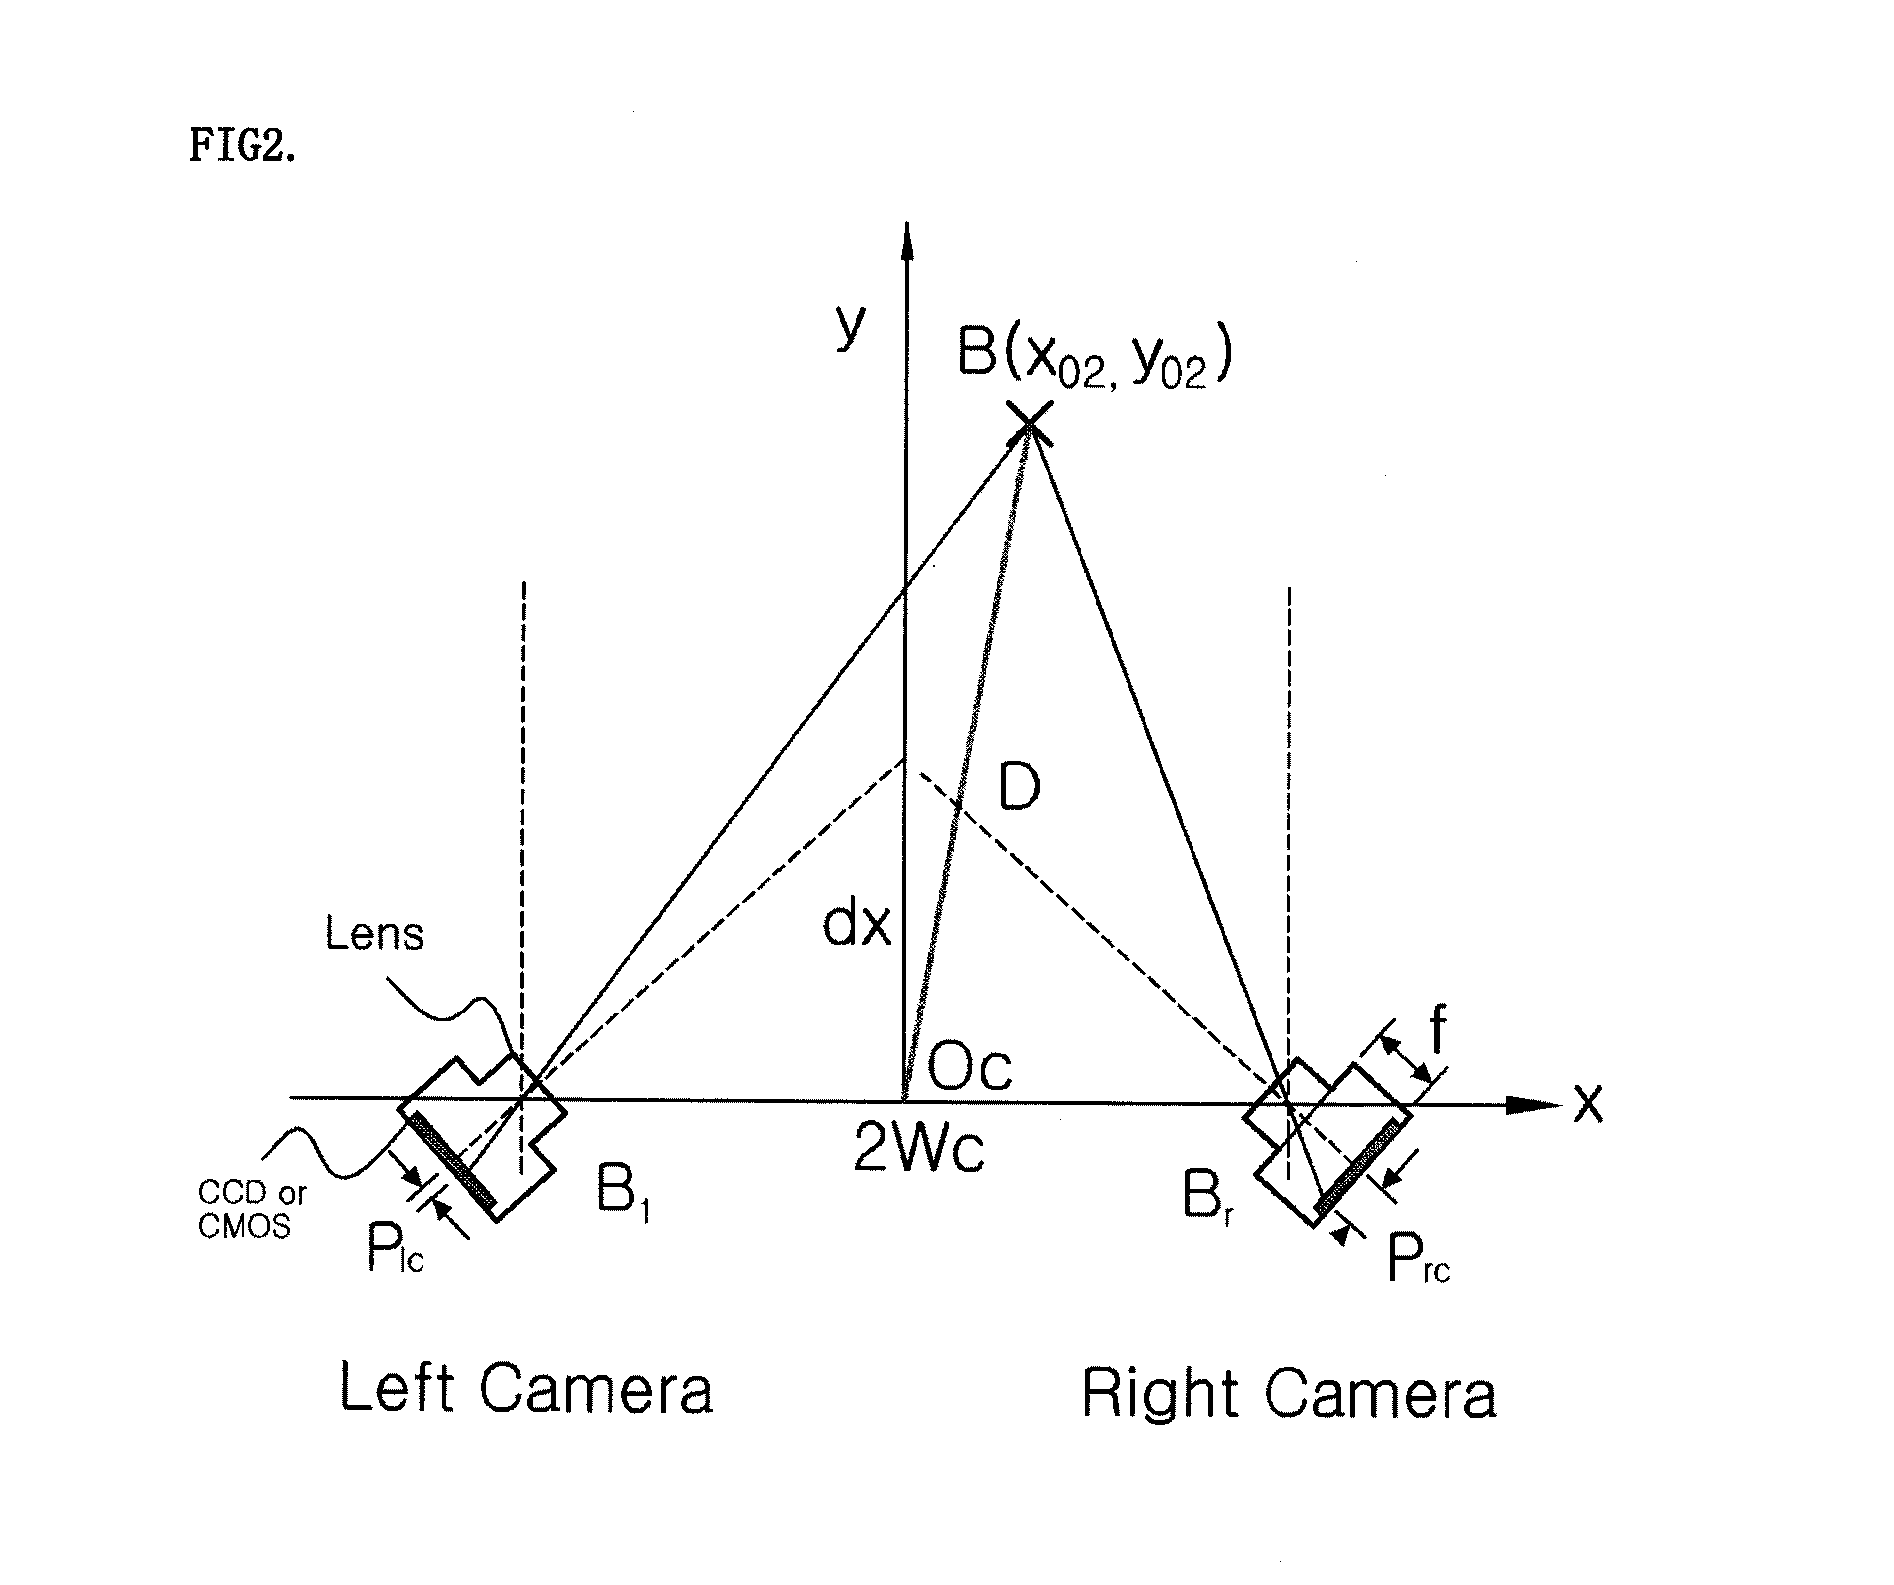 Image sensor for generating stereoscopic images